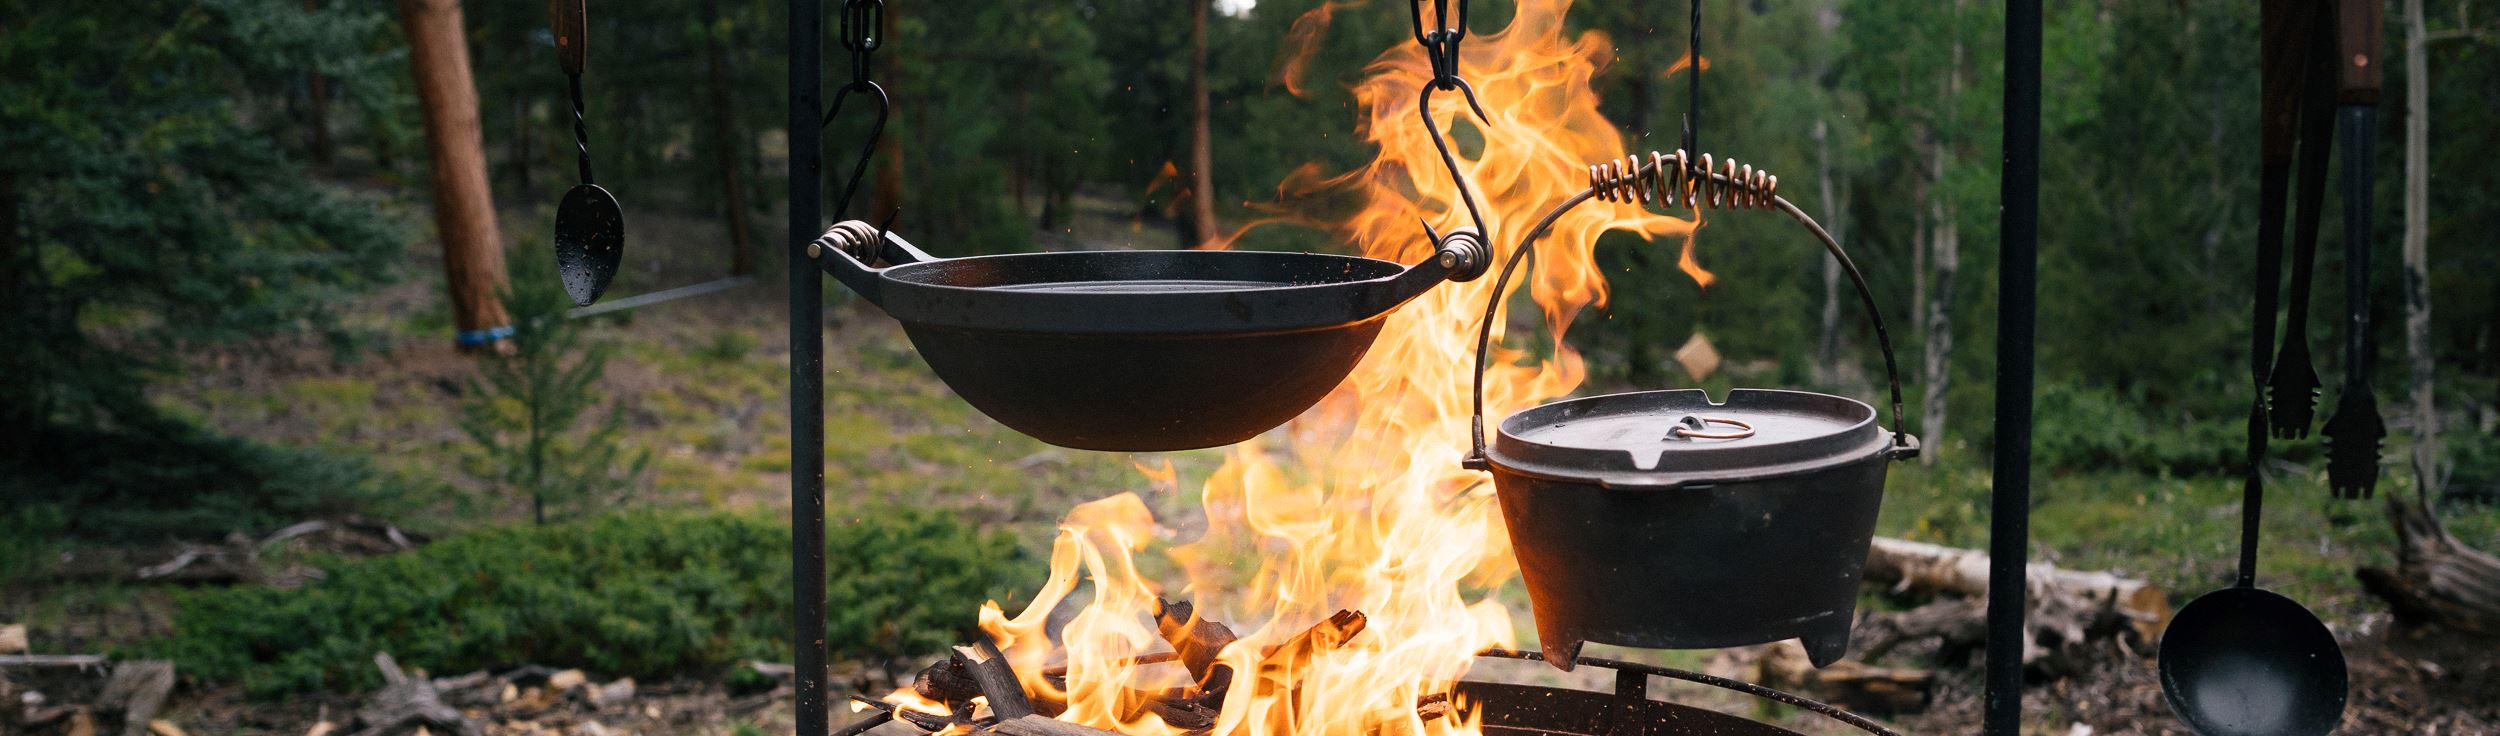 Dutch Oven Cooking On The BBQ Or Over An Open Fire